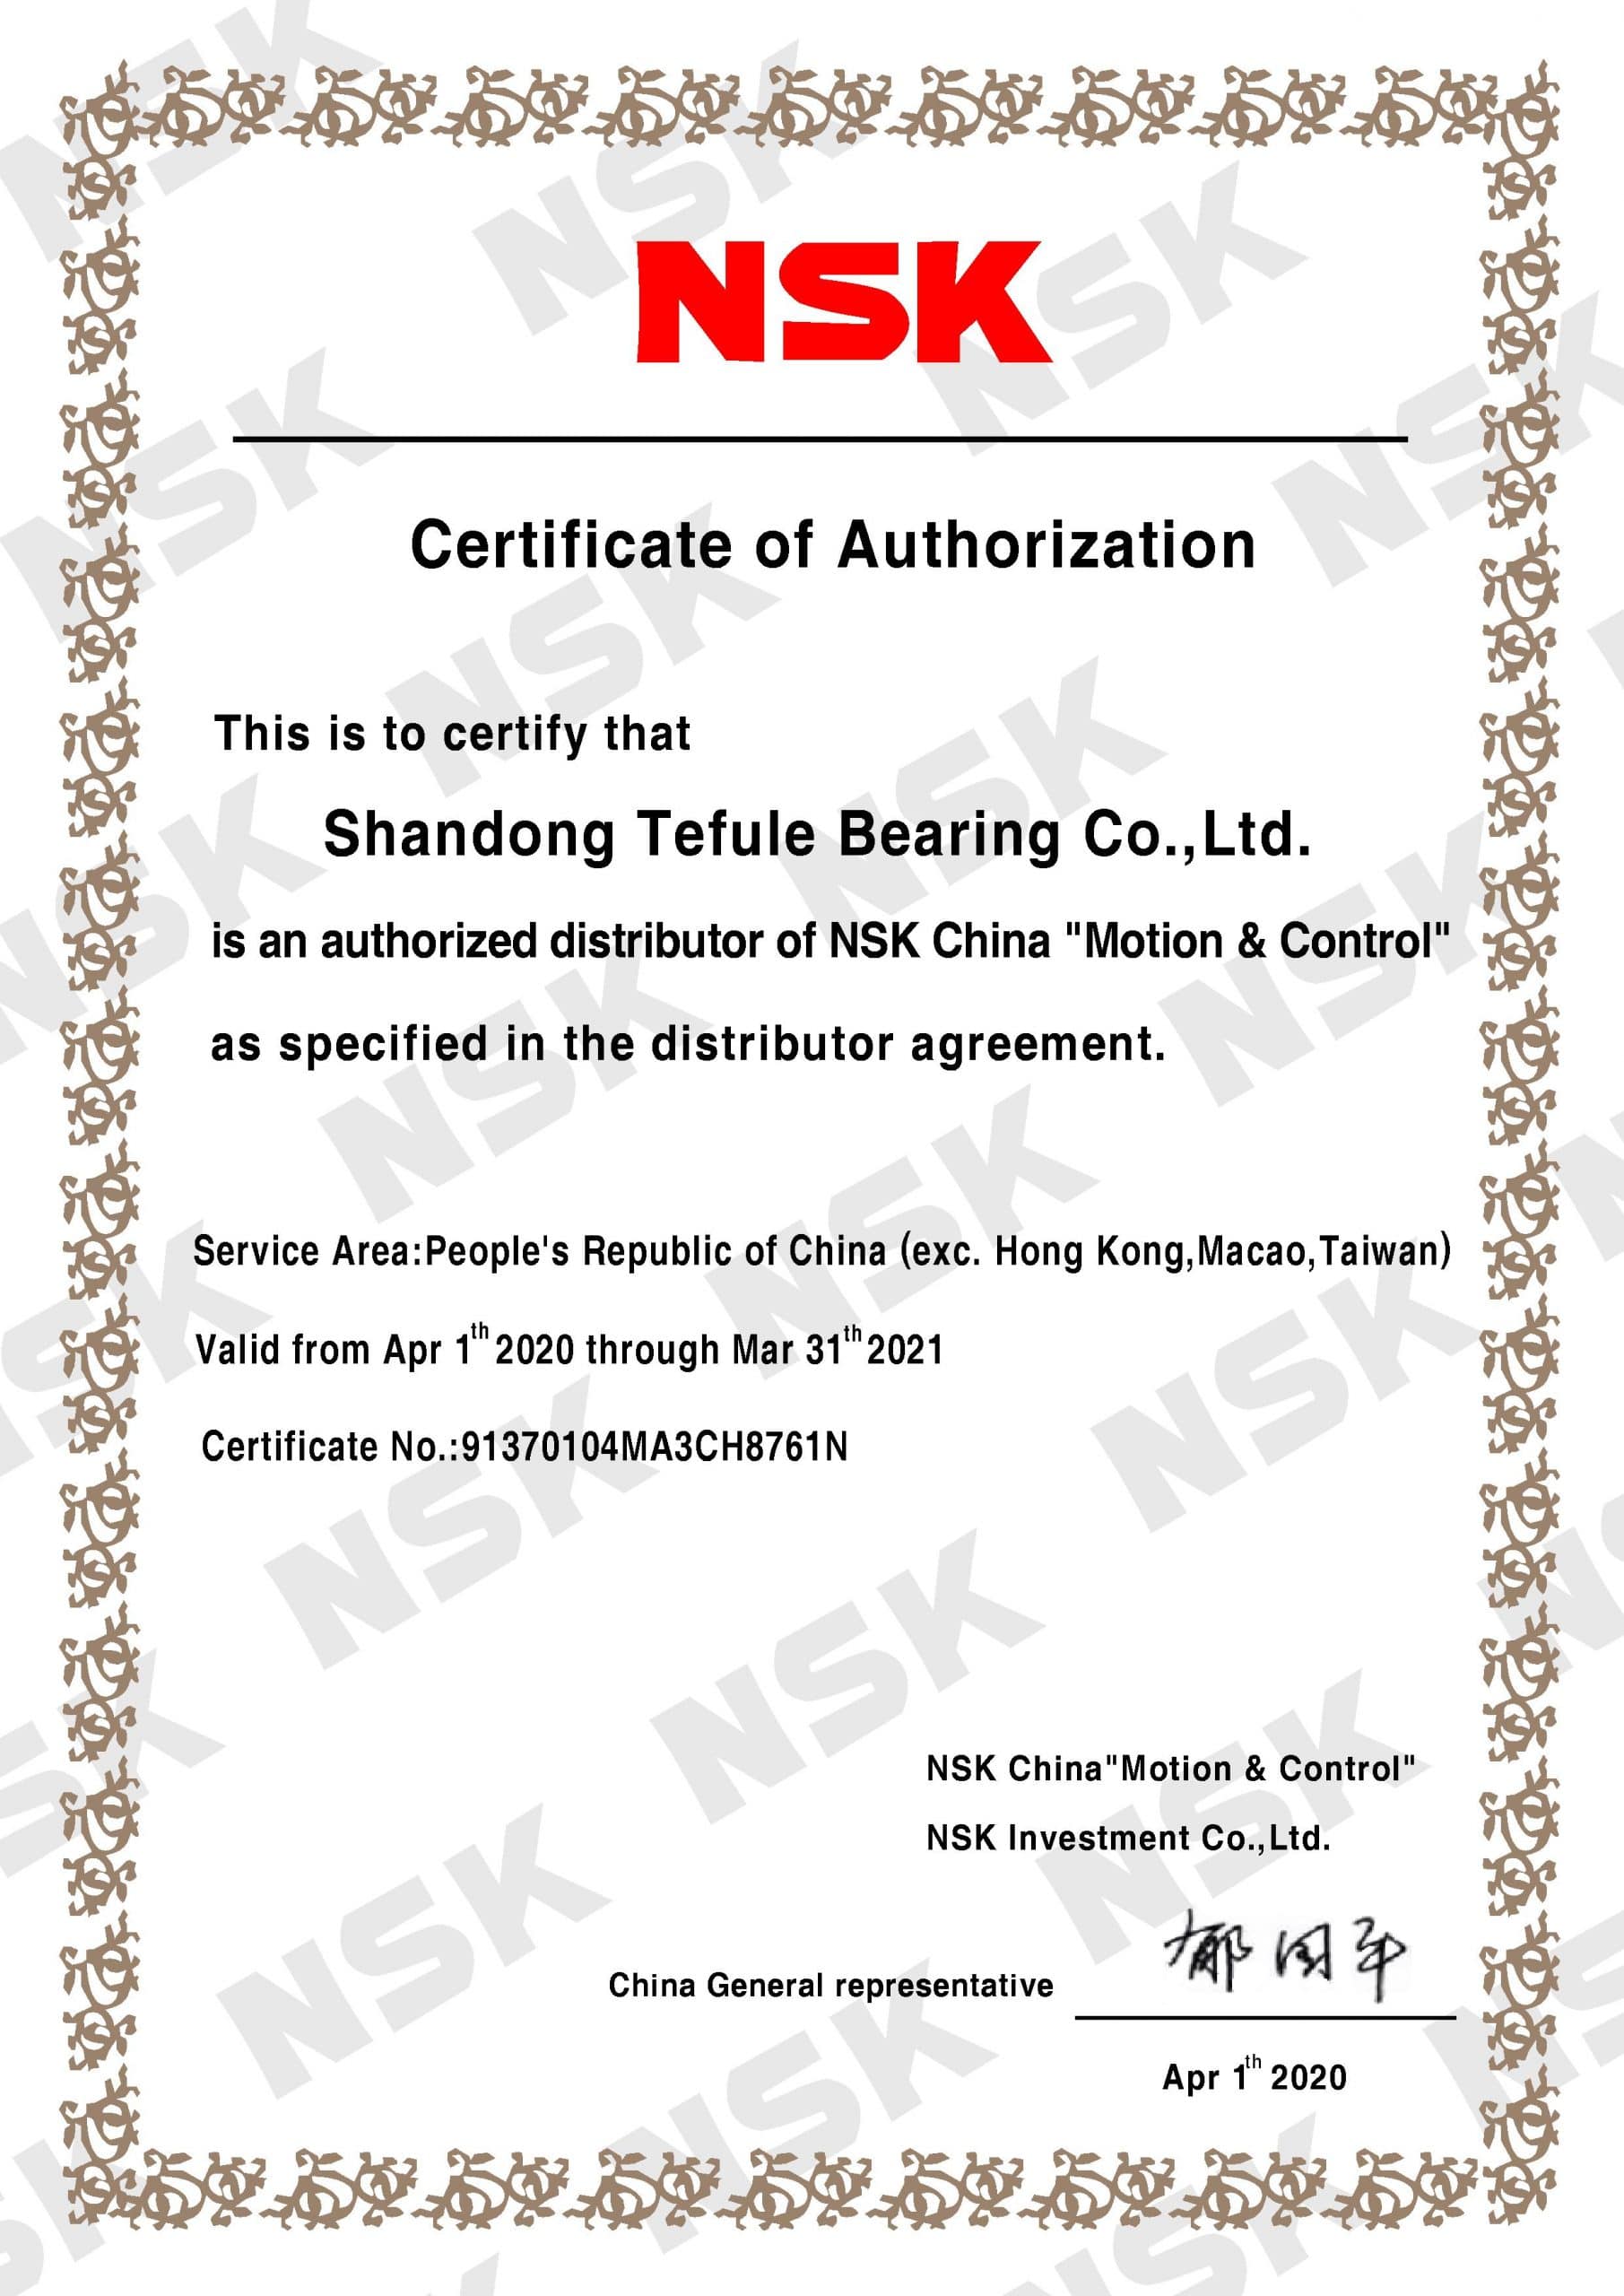 NSK High Quality 16011 Thin Section Deep Groove Ball Bearing